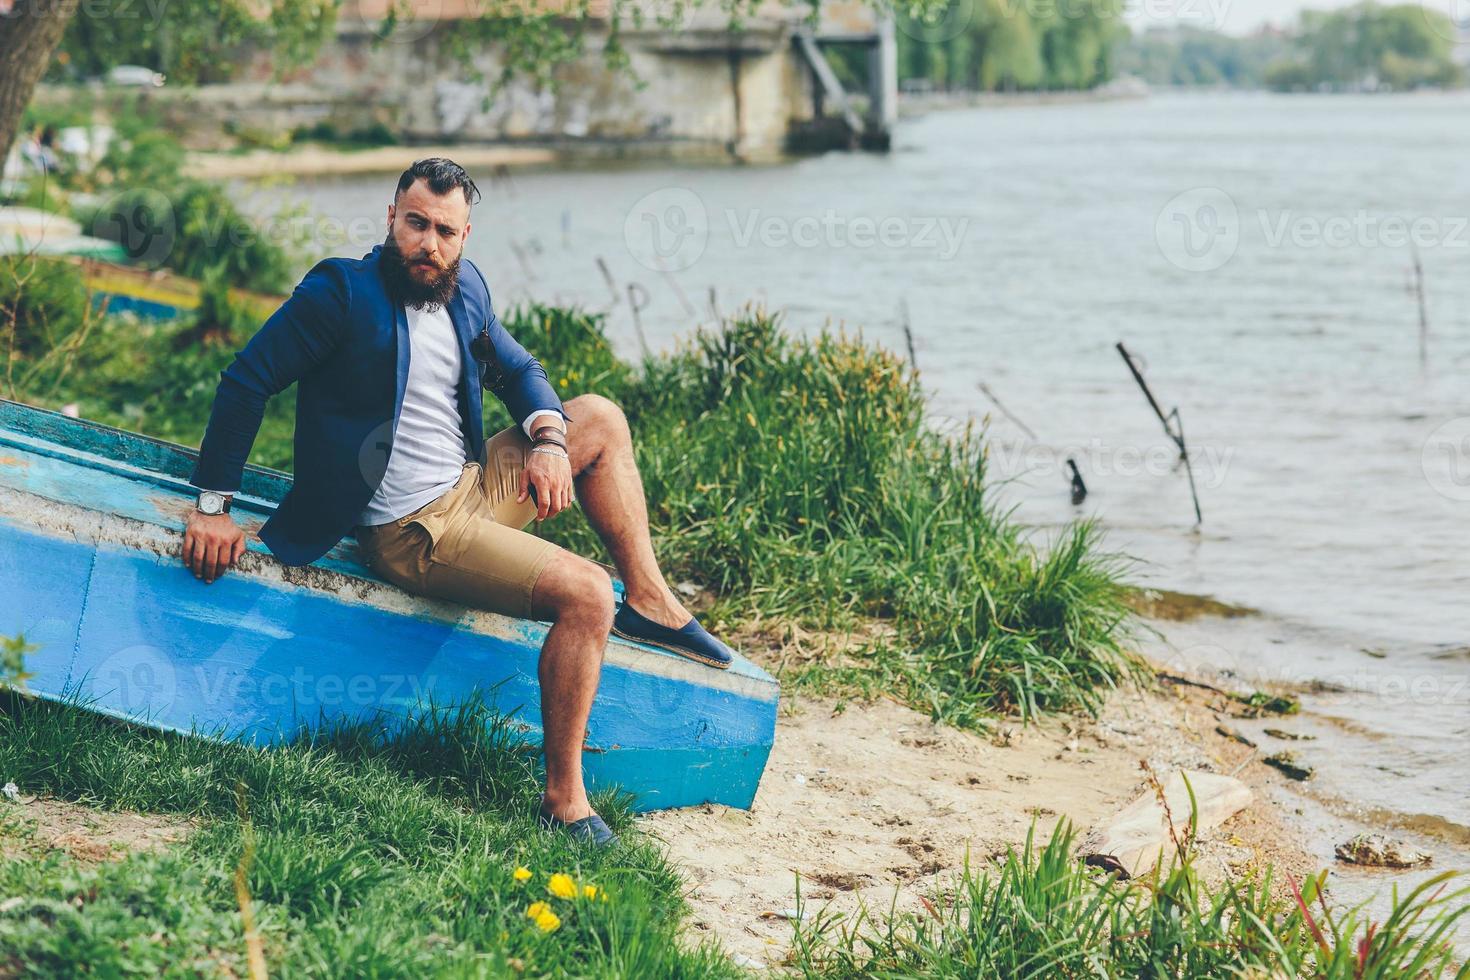 American Bearded Man looks on the river bank photo